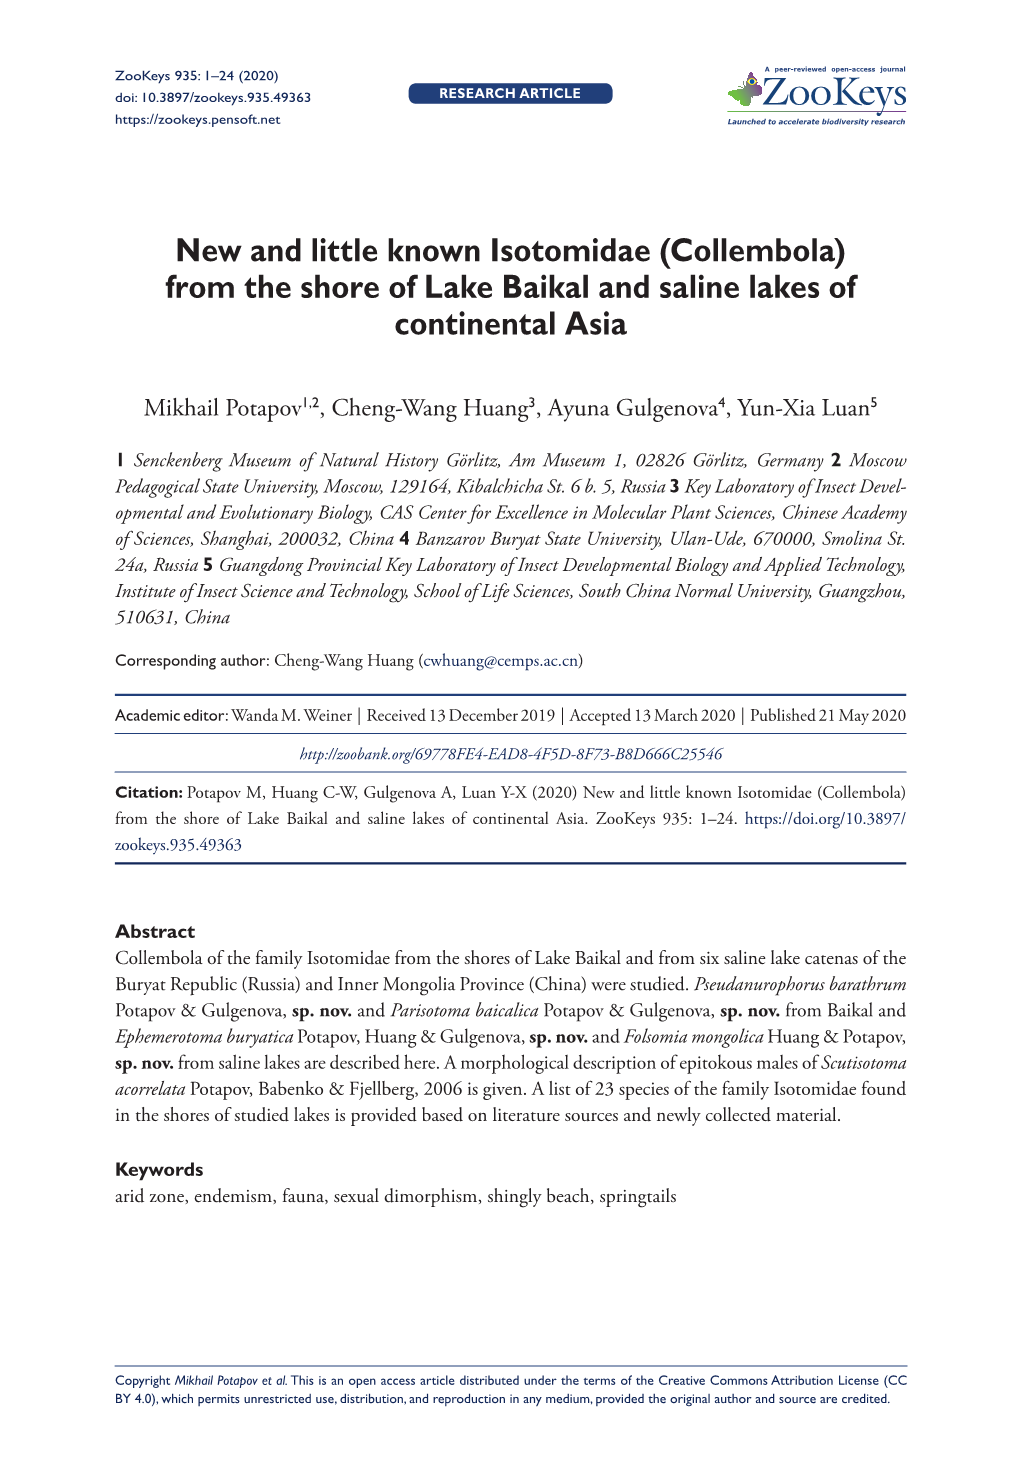 New and Little Known Isotomidae (Collembola) from the Shore of Lake Baikal and Saline Lakes of Continental Asia